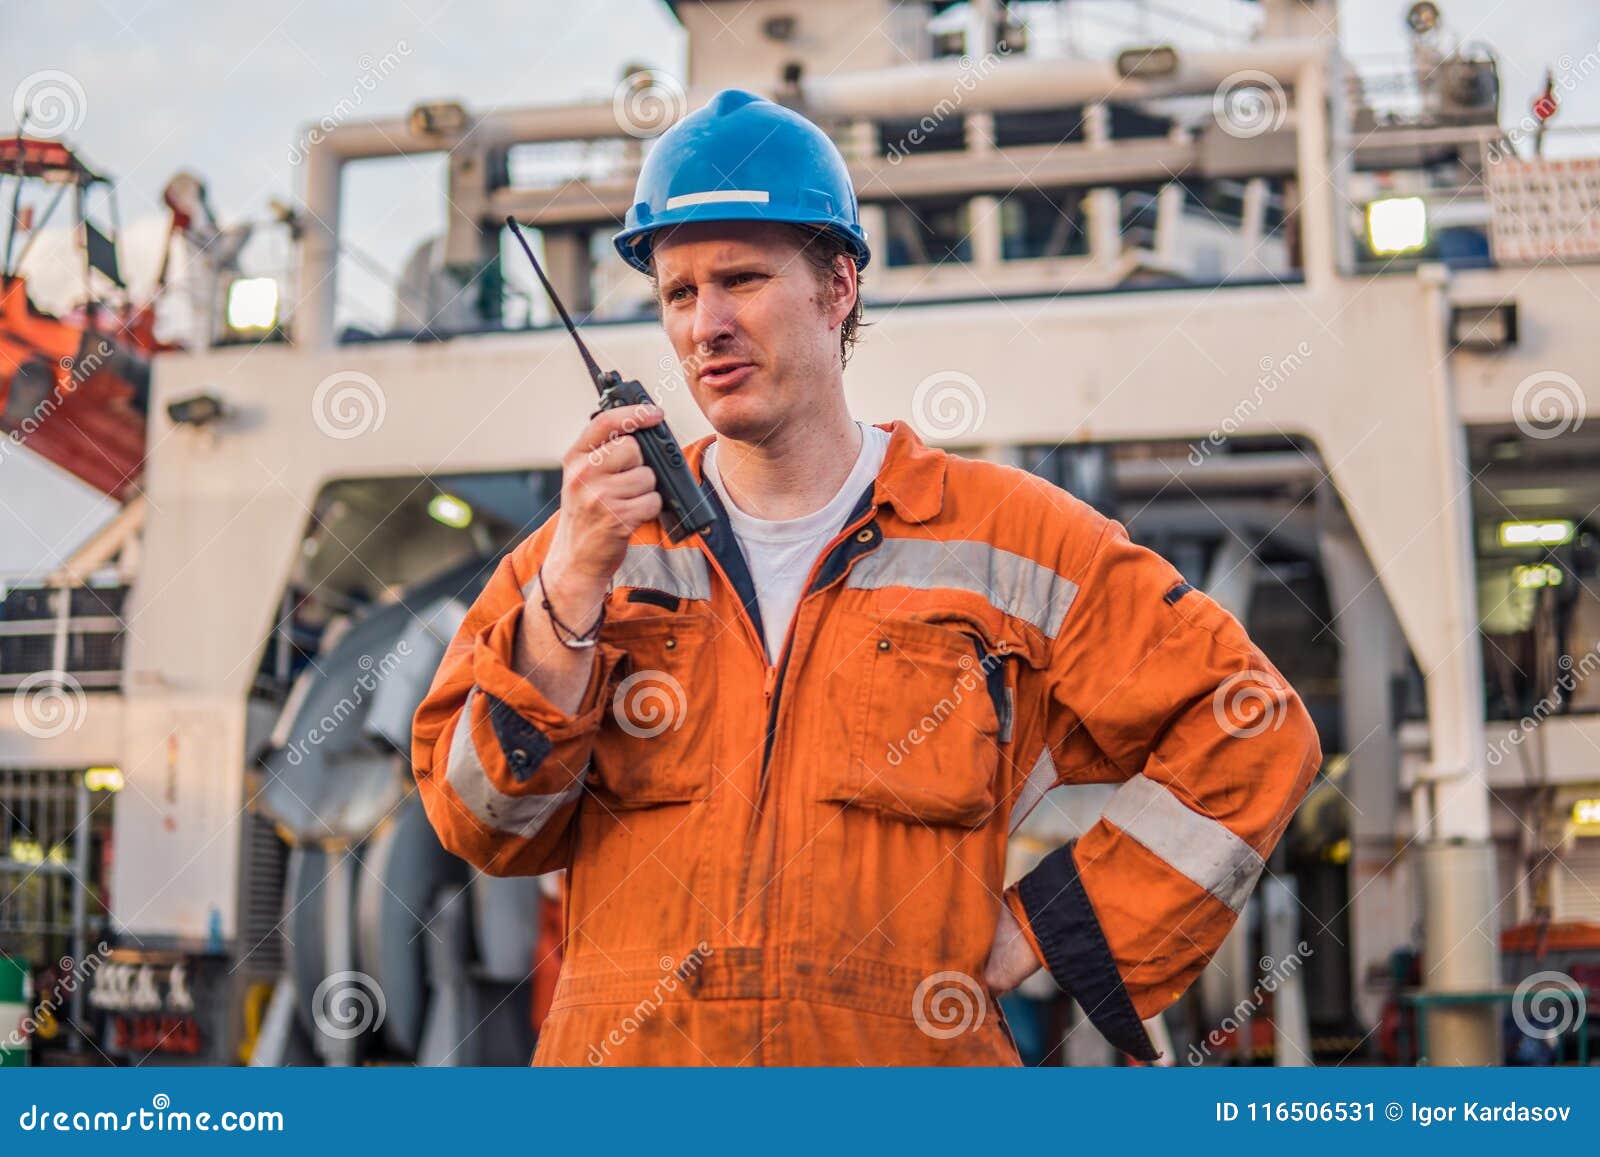 marine deck officer or chief mate on deck of ship with vhf radio